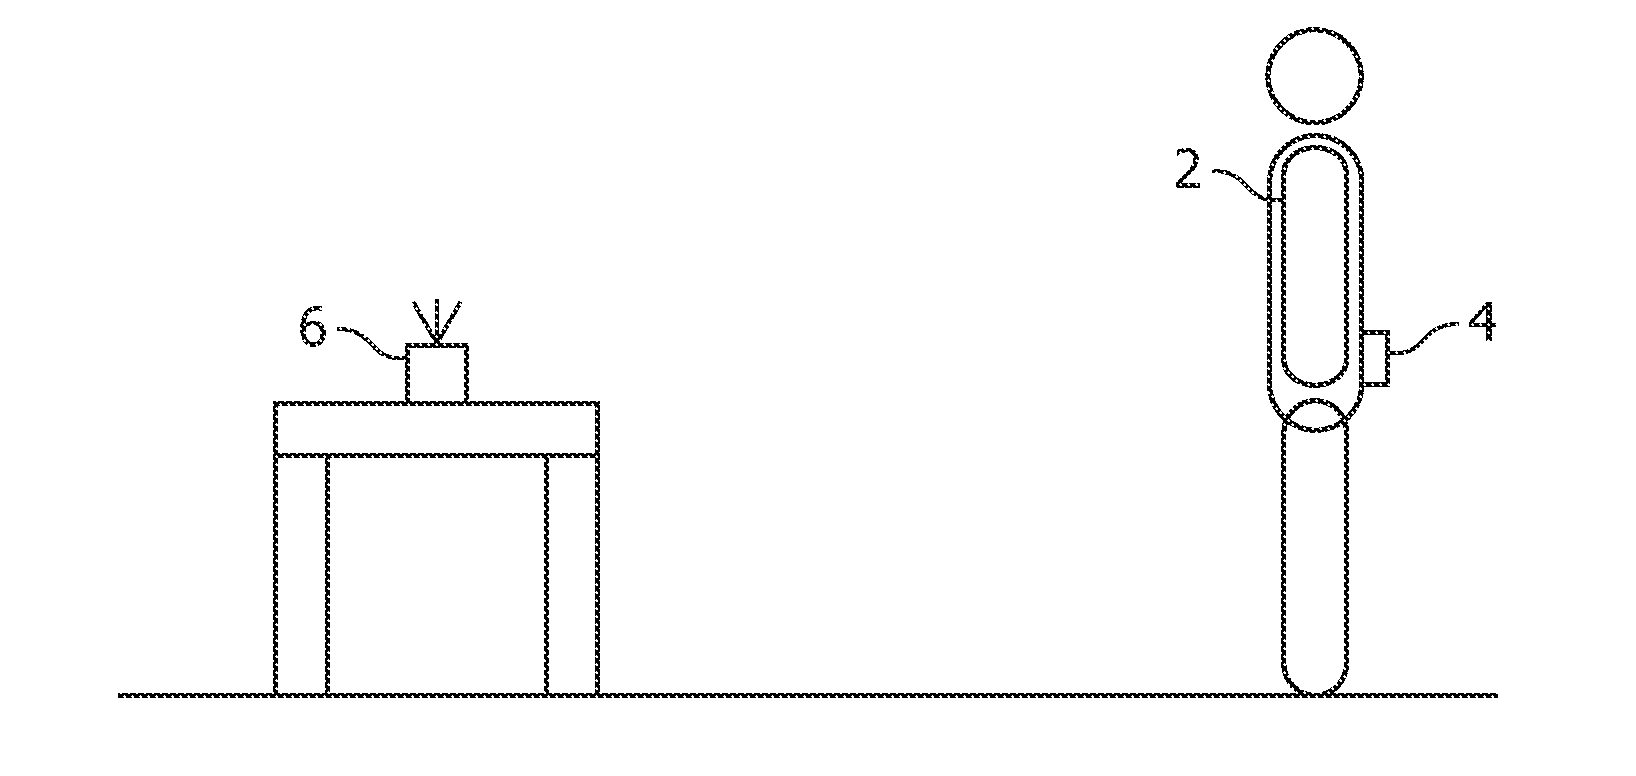 Displacement measurement in a fall detection system